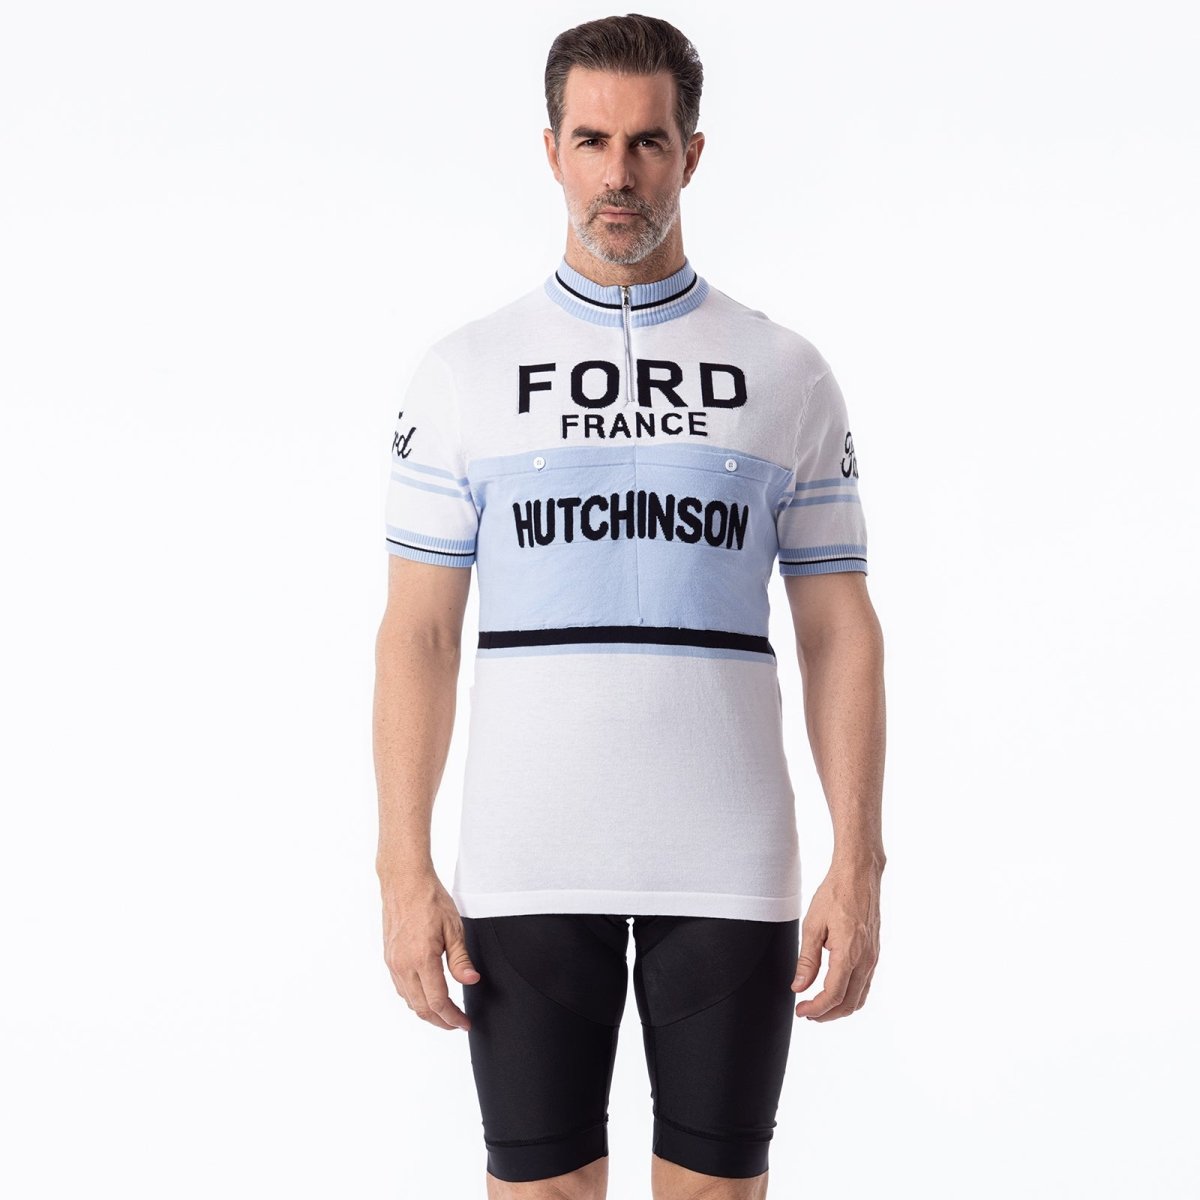 Ford France Hutchinson Deluxe Merino Wool Retro Cycling Jersey Retro Wool Cycling Jersey- Retro Peloton